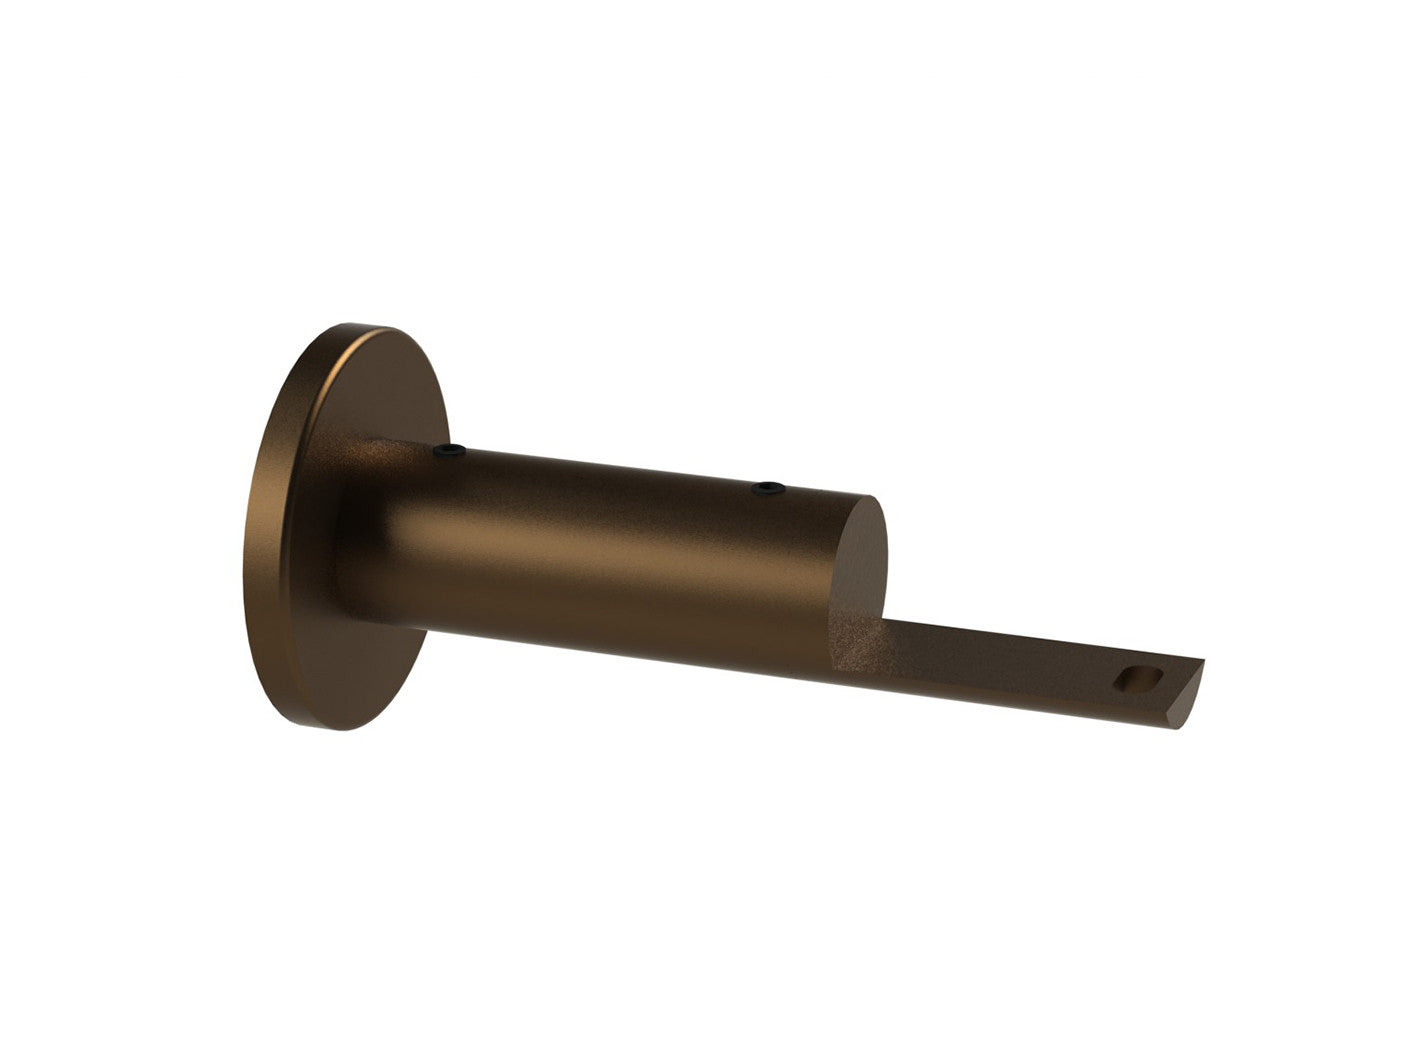 brushed bronze passing bracket by Walcot House